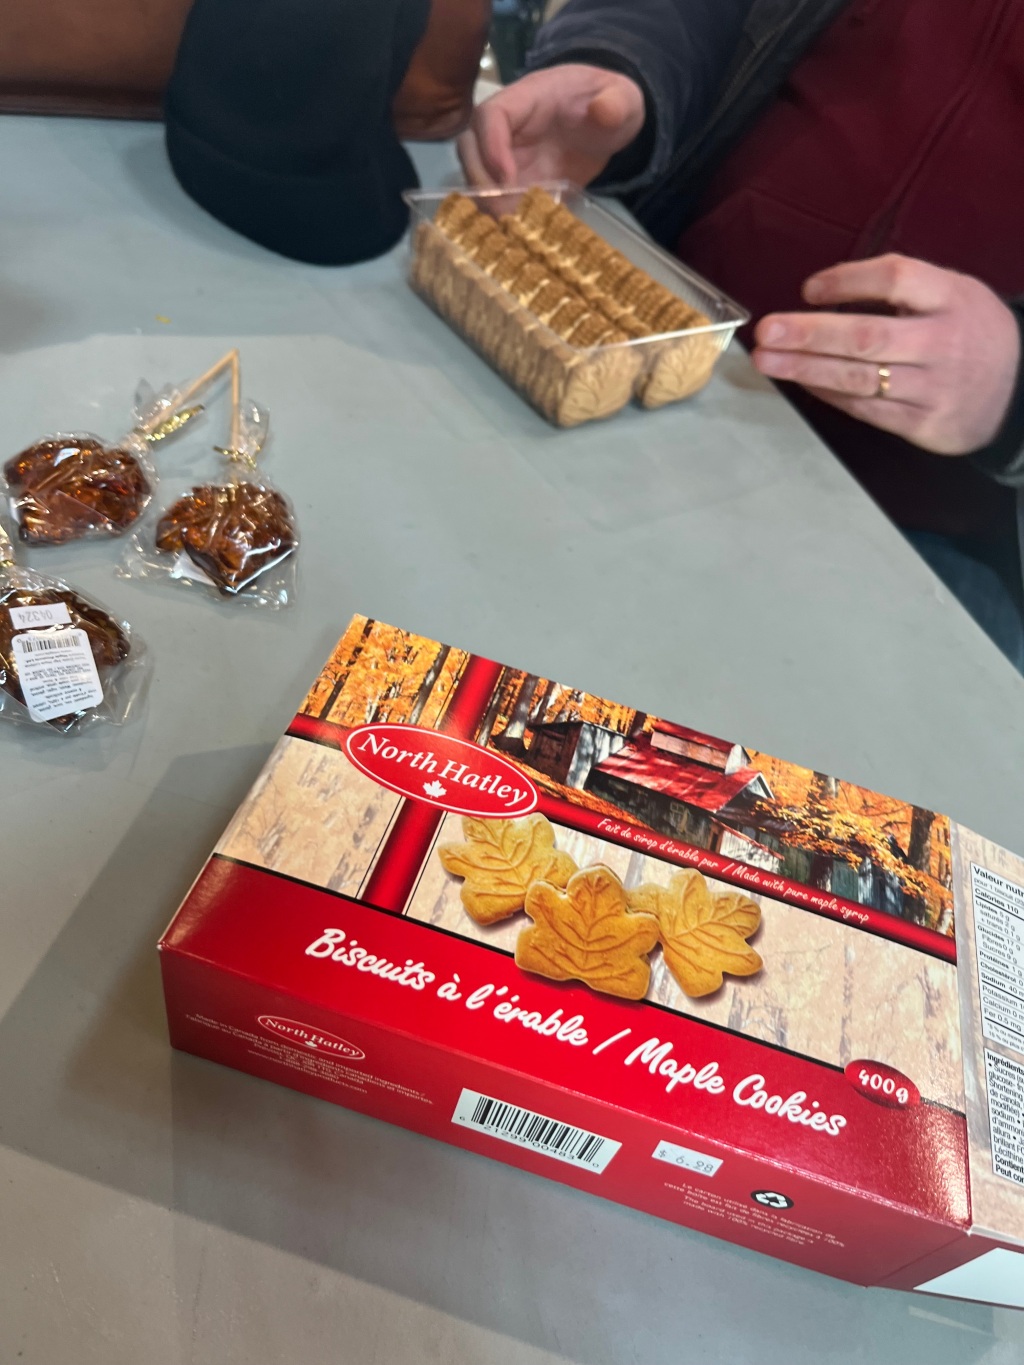 Have you ever eaten real Maple cookie?（本物のメープルクッキー食べたことありますか？）